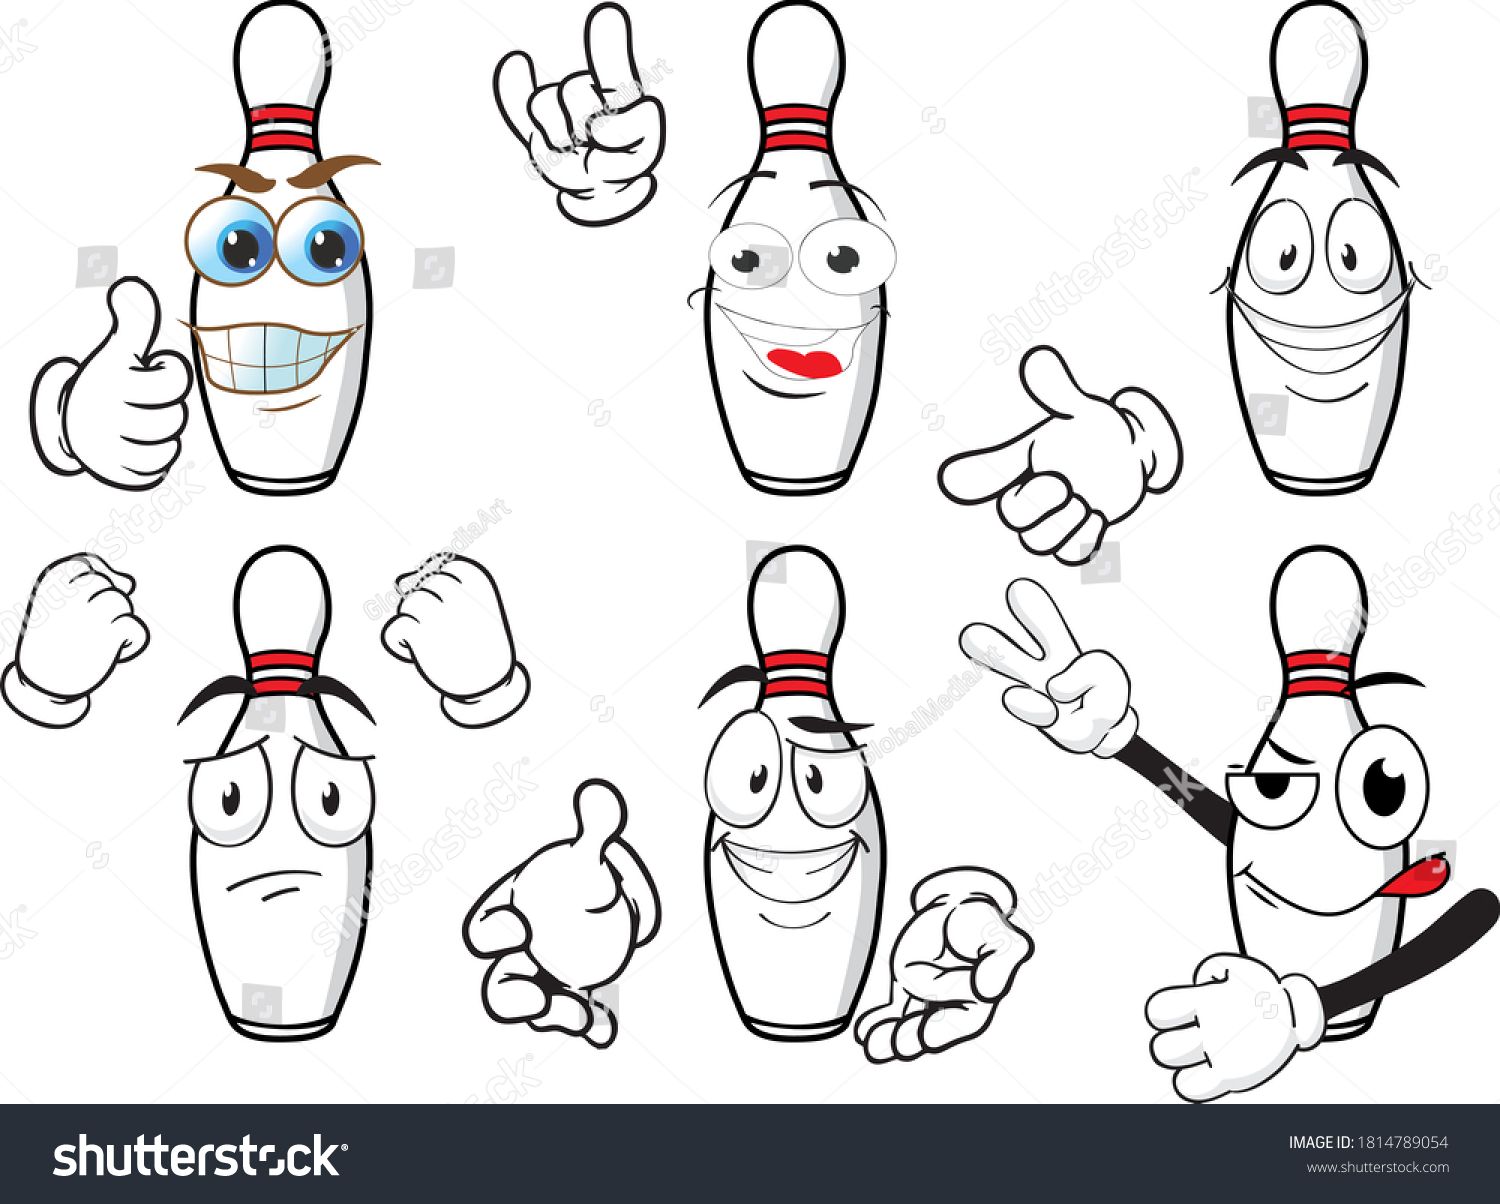 2,841 Funny bowling Images, Stock Photos & Vectors | Shutterstock